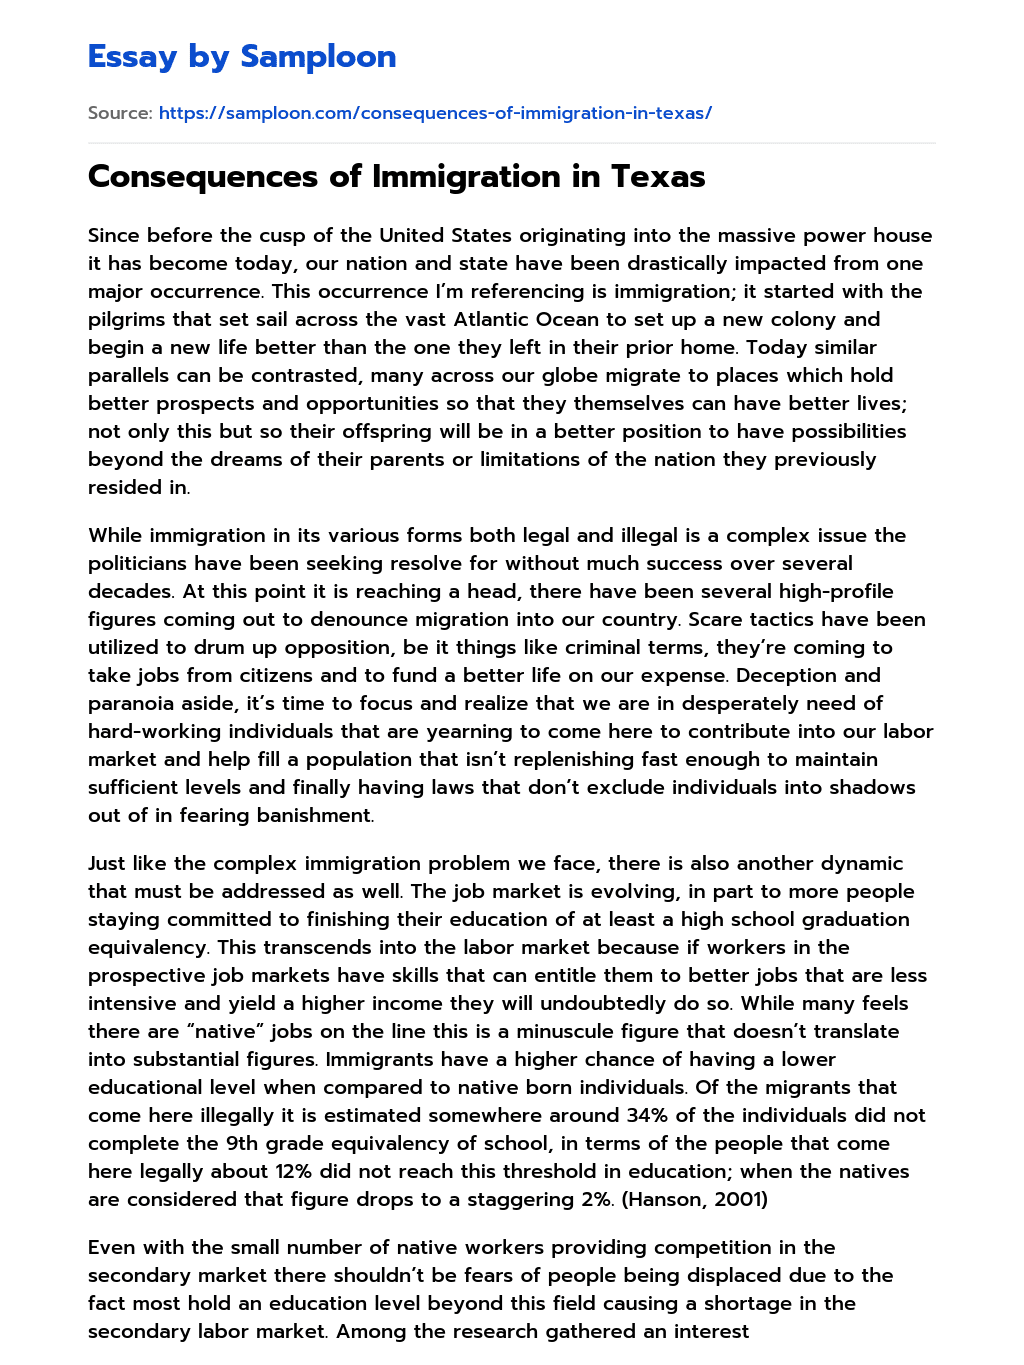 Consequences of Immigration in Texas essay